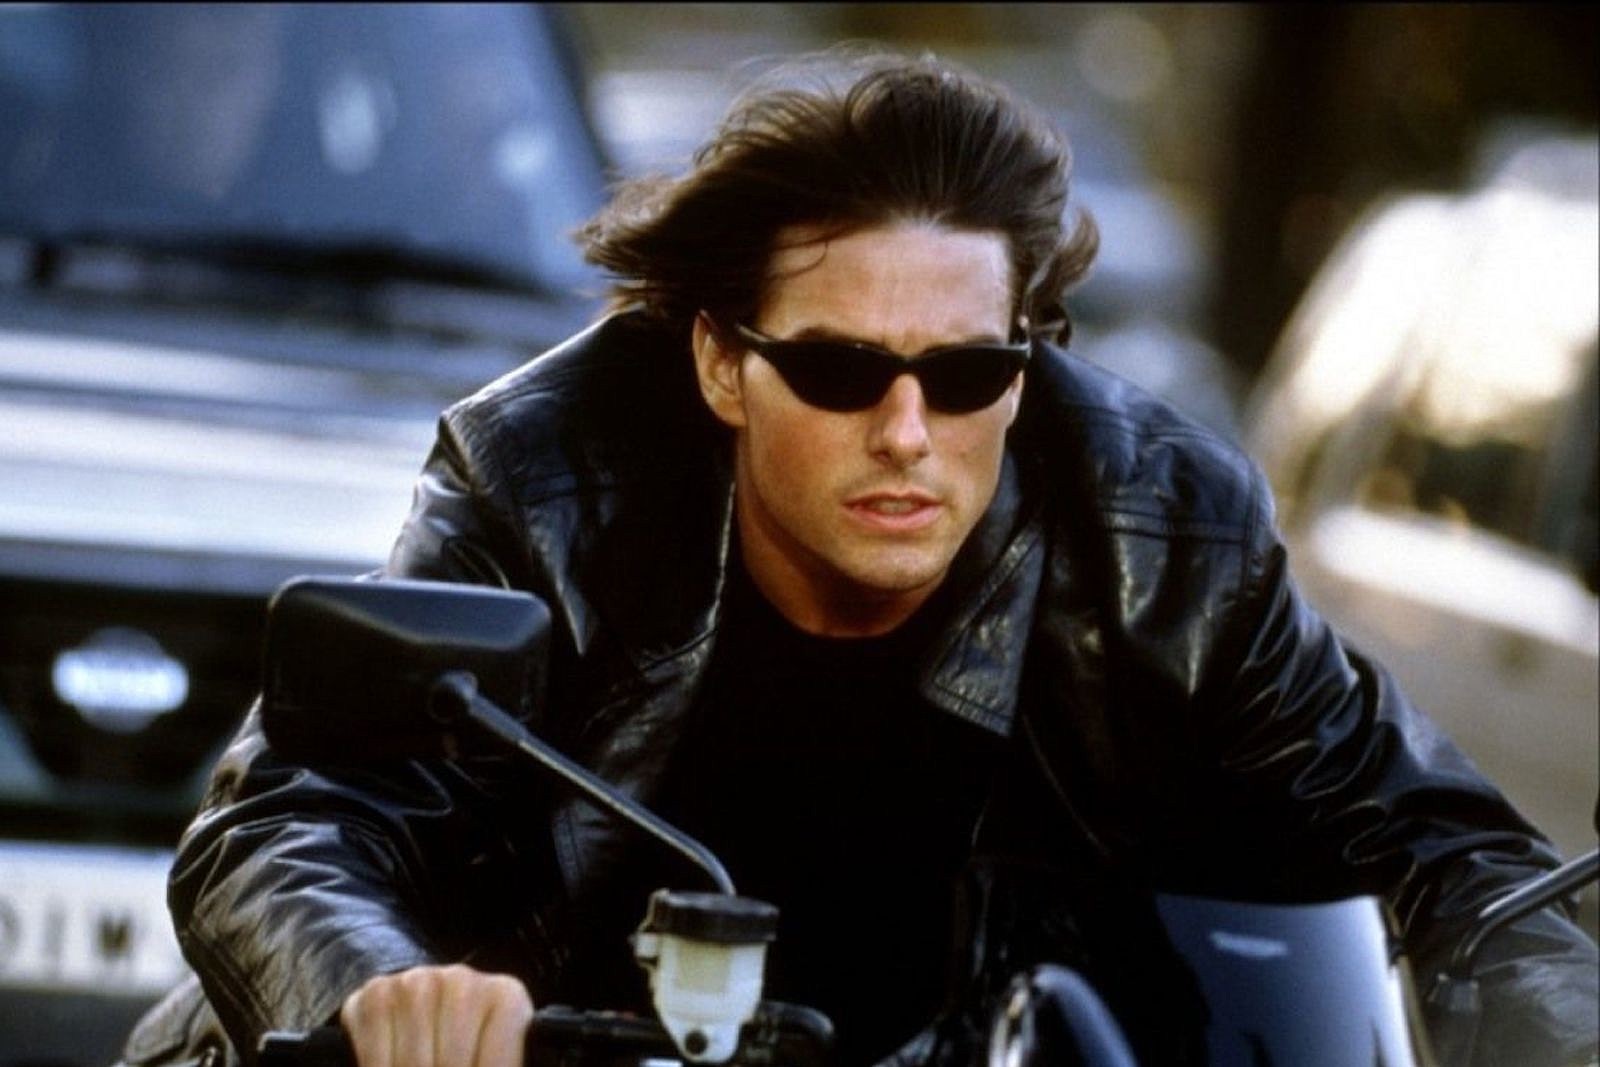 Tom Cruise as Ethan Hunt in Mission: Impossible franchise